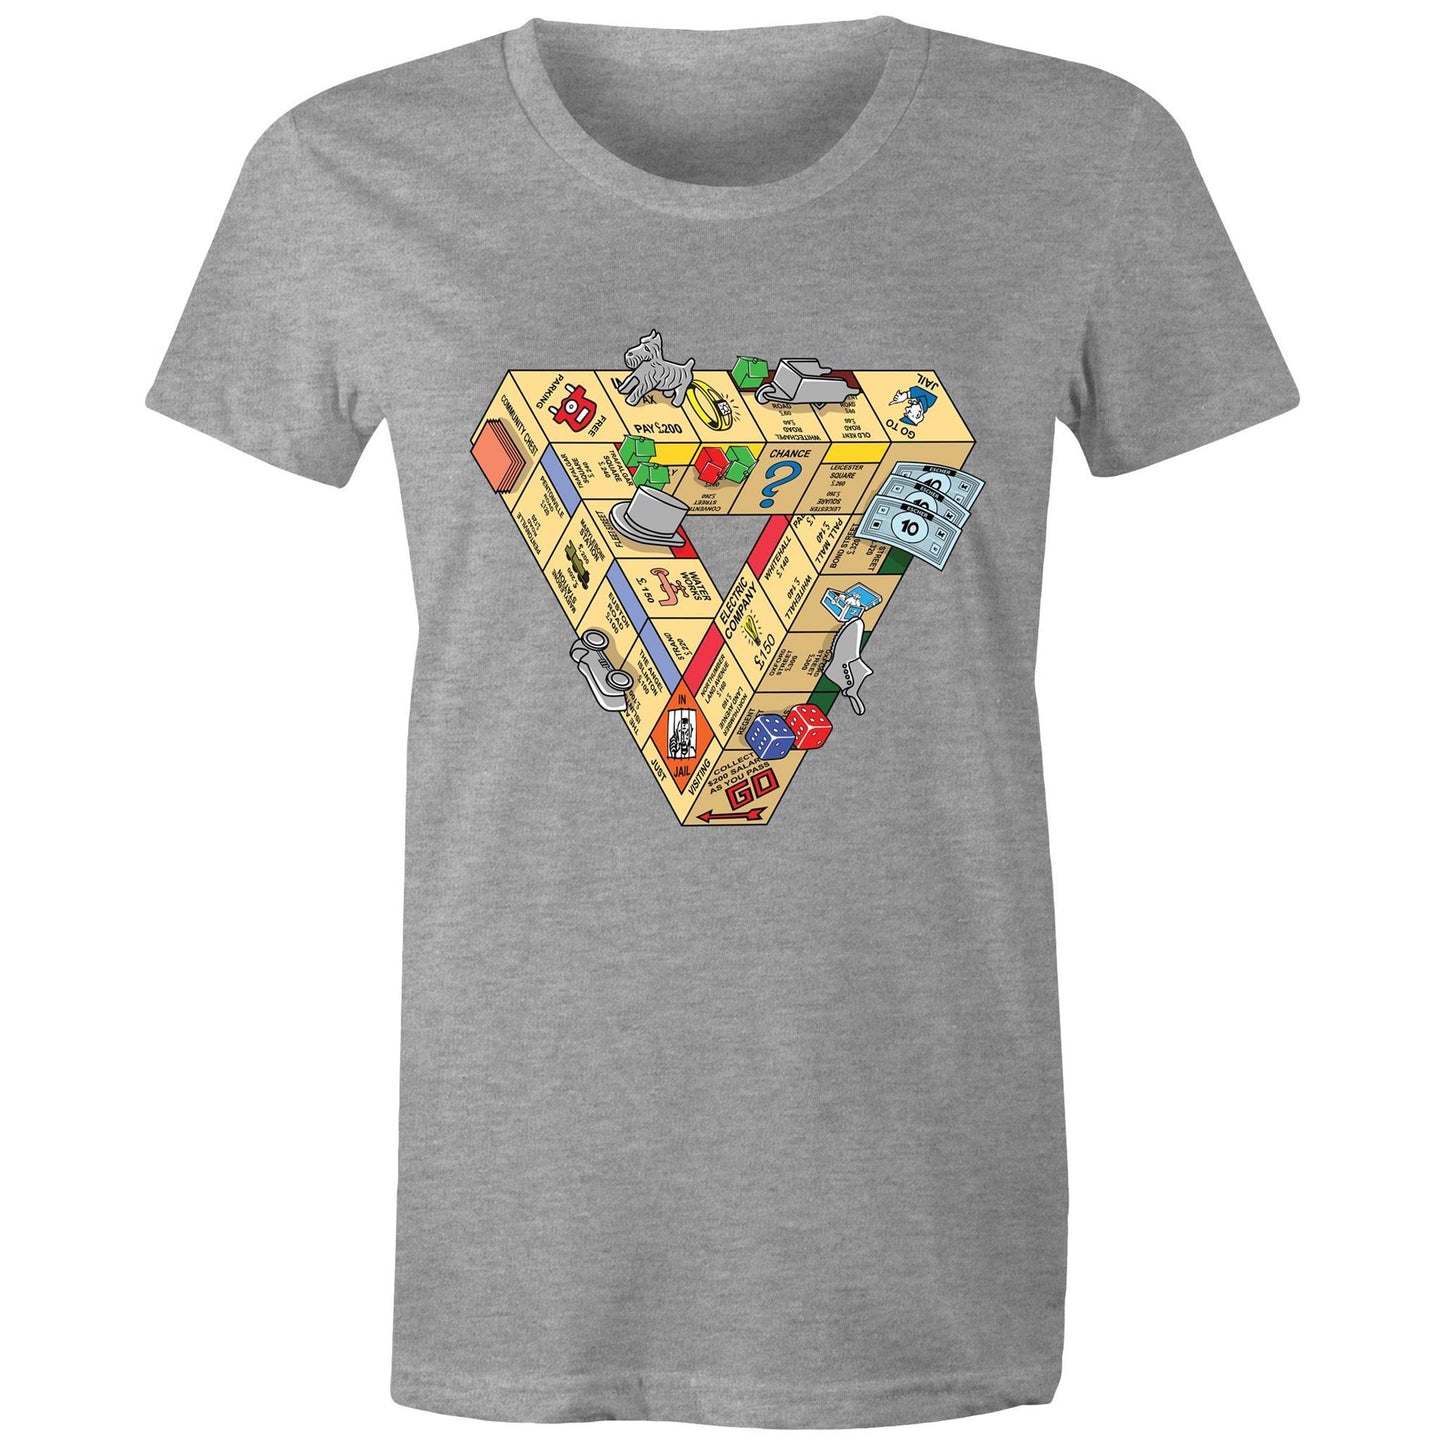 The Impossible Board Game - Women's T-Shirt